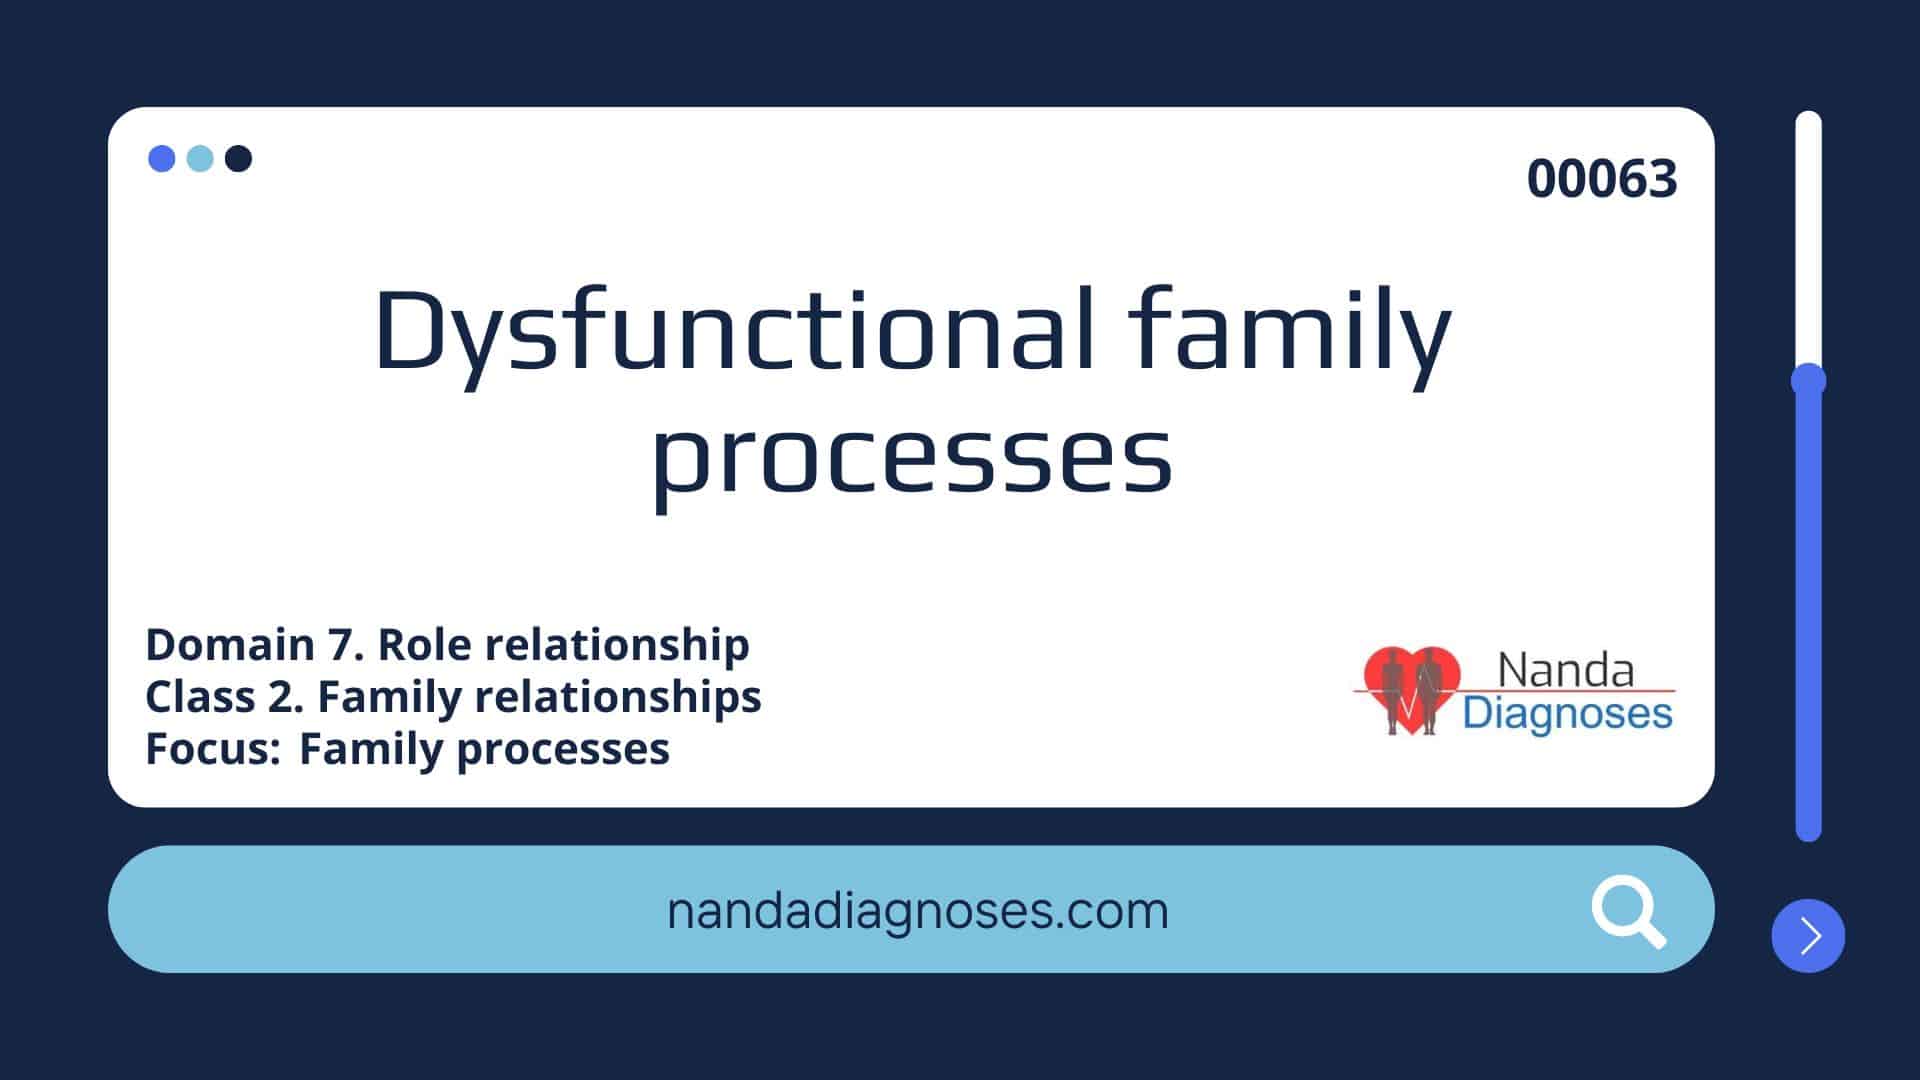 Dysfunctional family processes